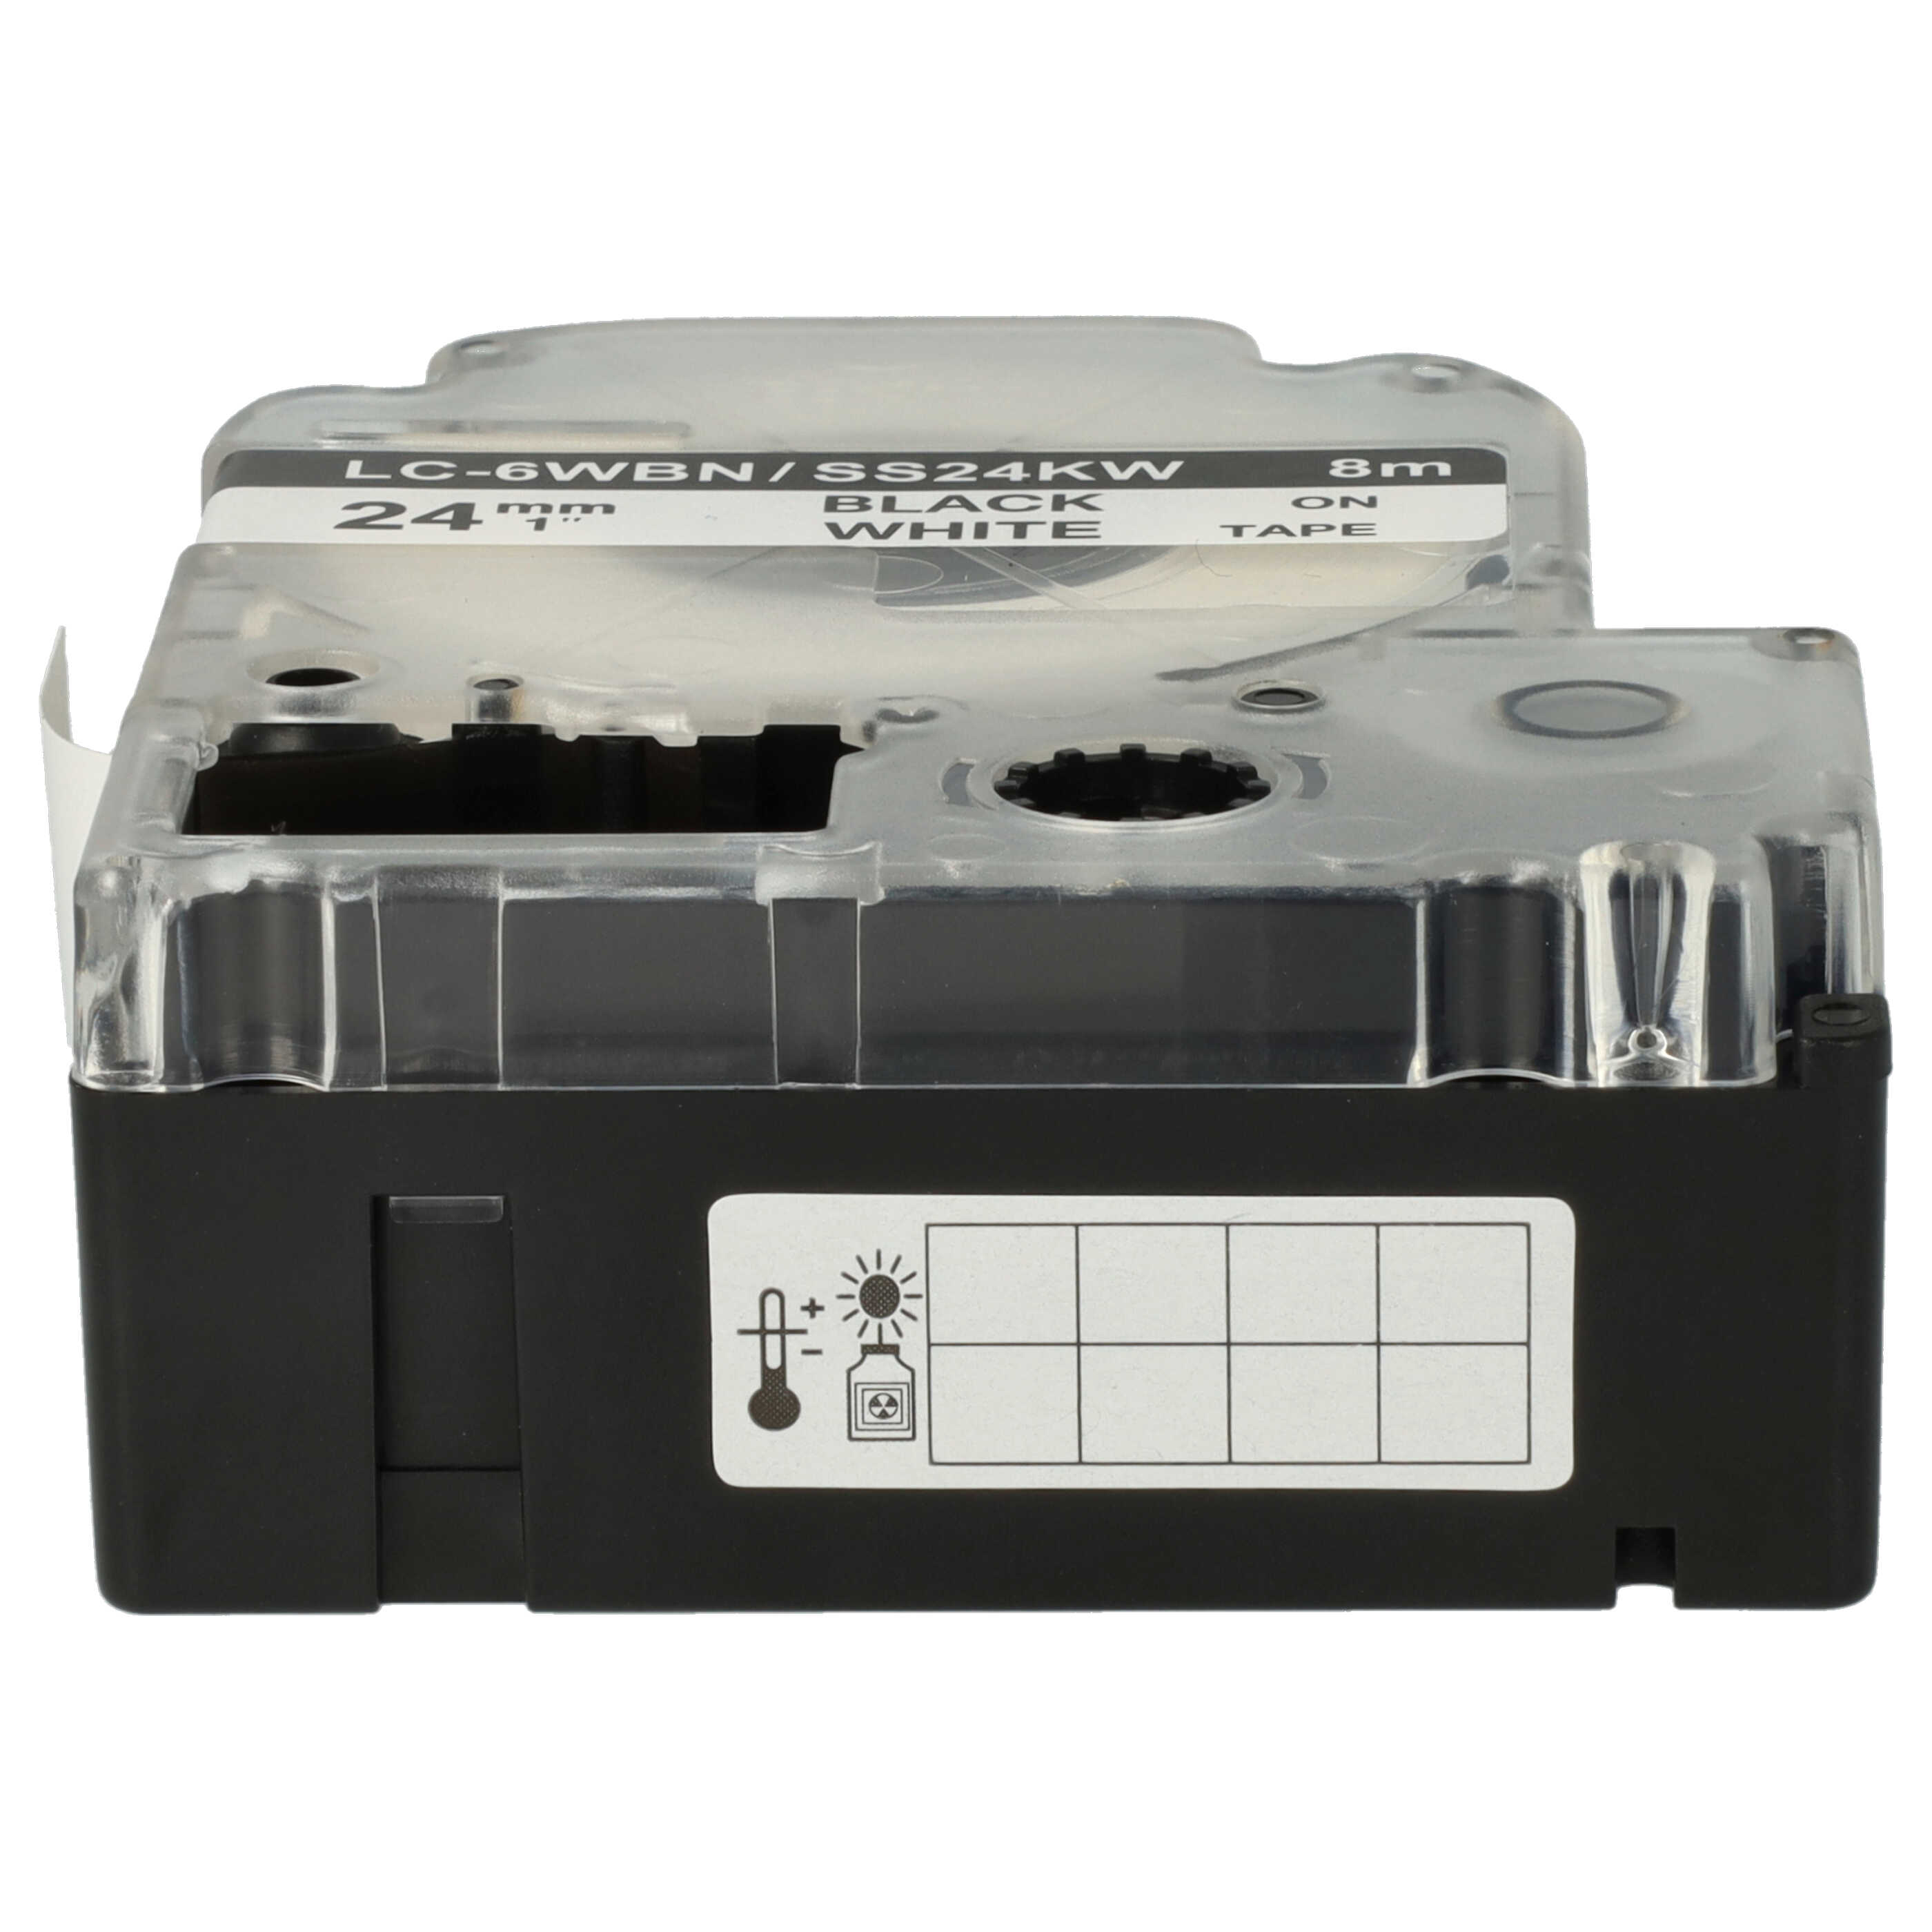 50x Label Tape as Replacement for Epson LC-6WBN - 24 mm Black to White